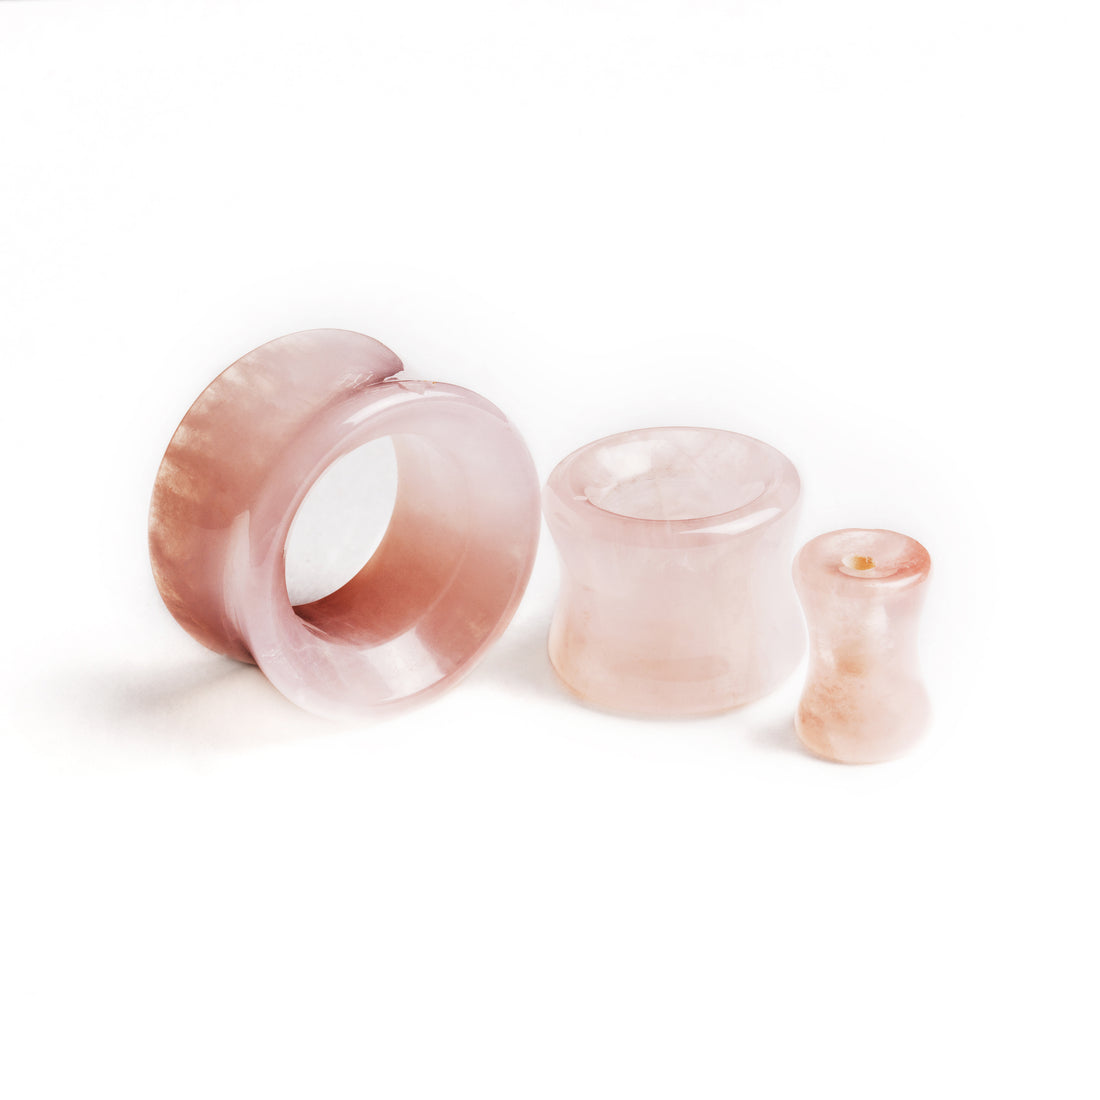 several sizes of rose quartz double flare stone ear tunnels all sides view